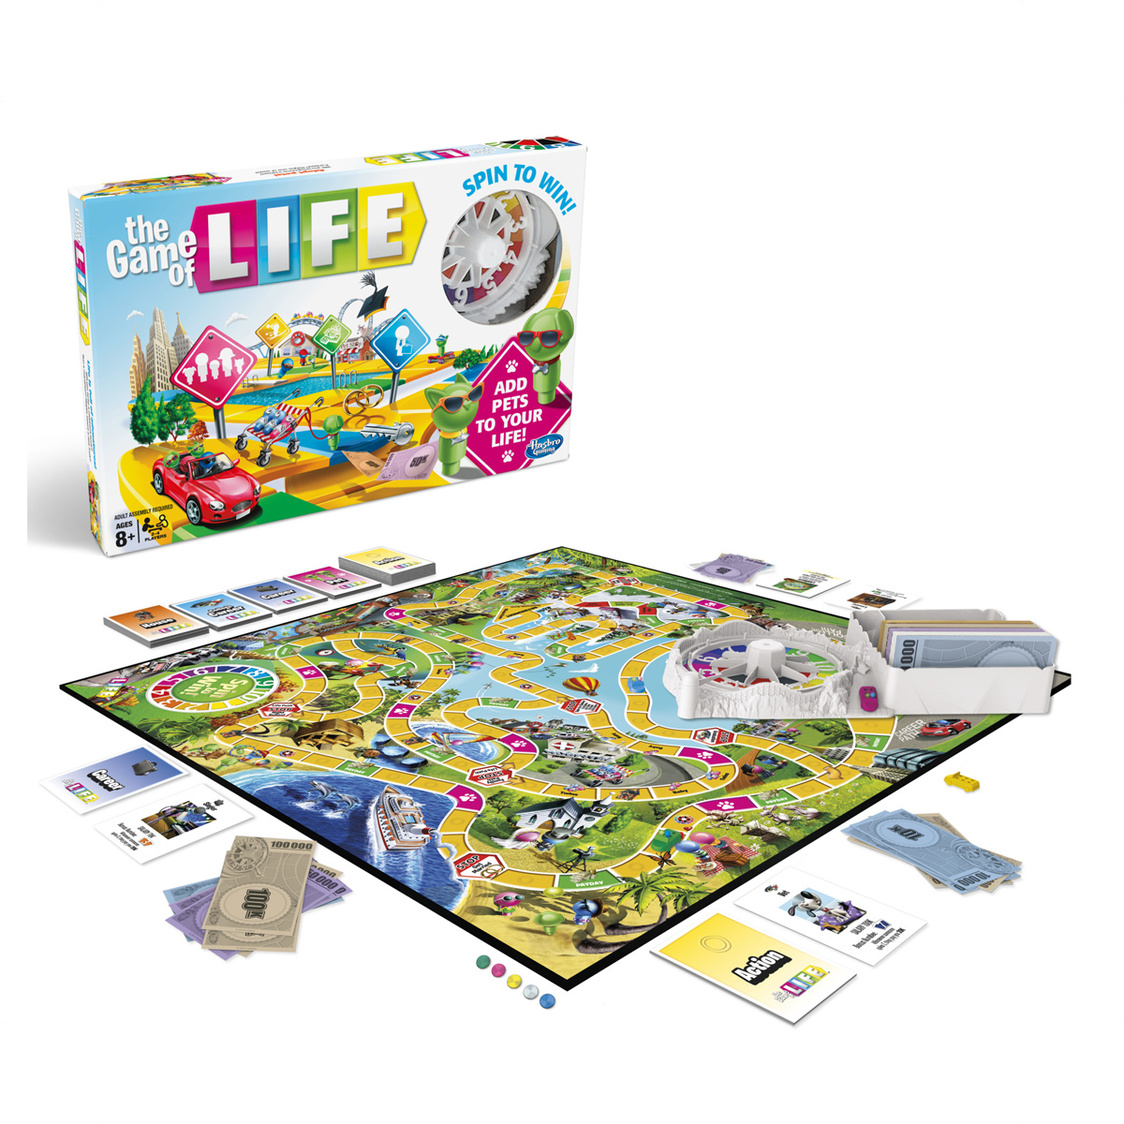 hasbro game of life rules